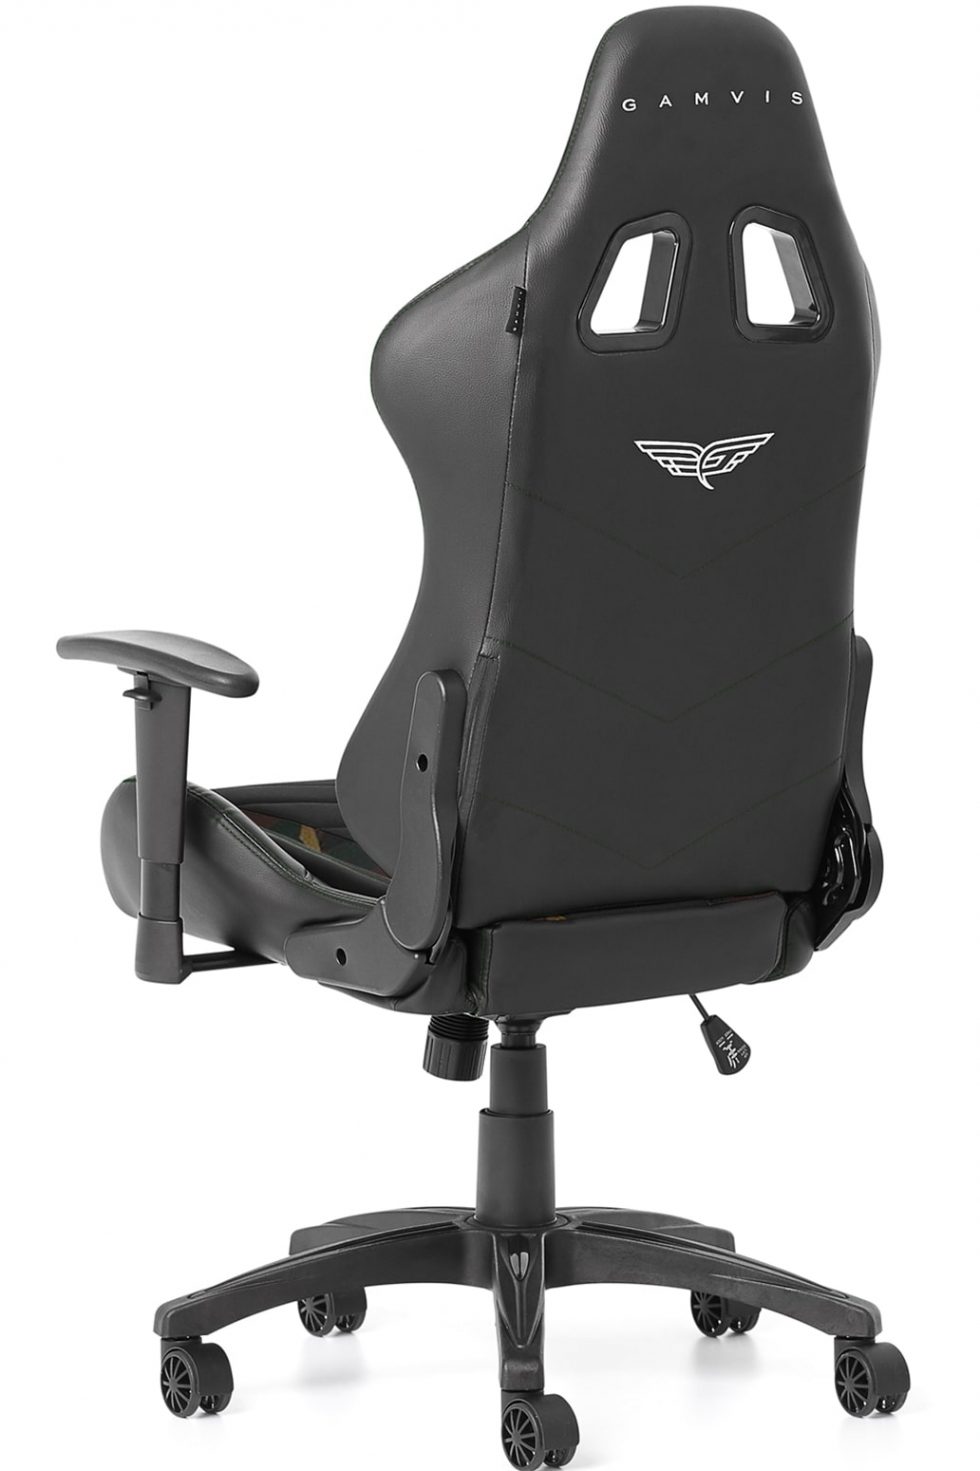 Gamvis EXPERT Fabric Gaming Chair - Black/Green Camo